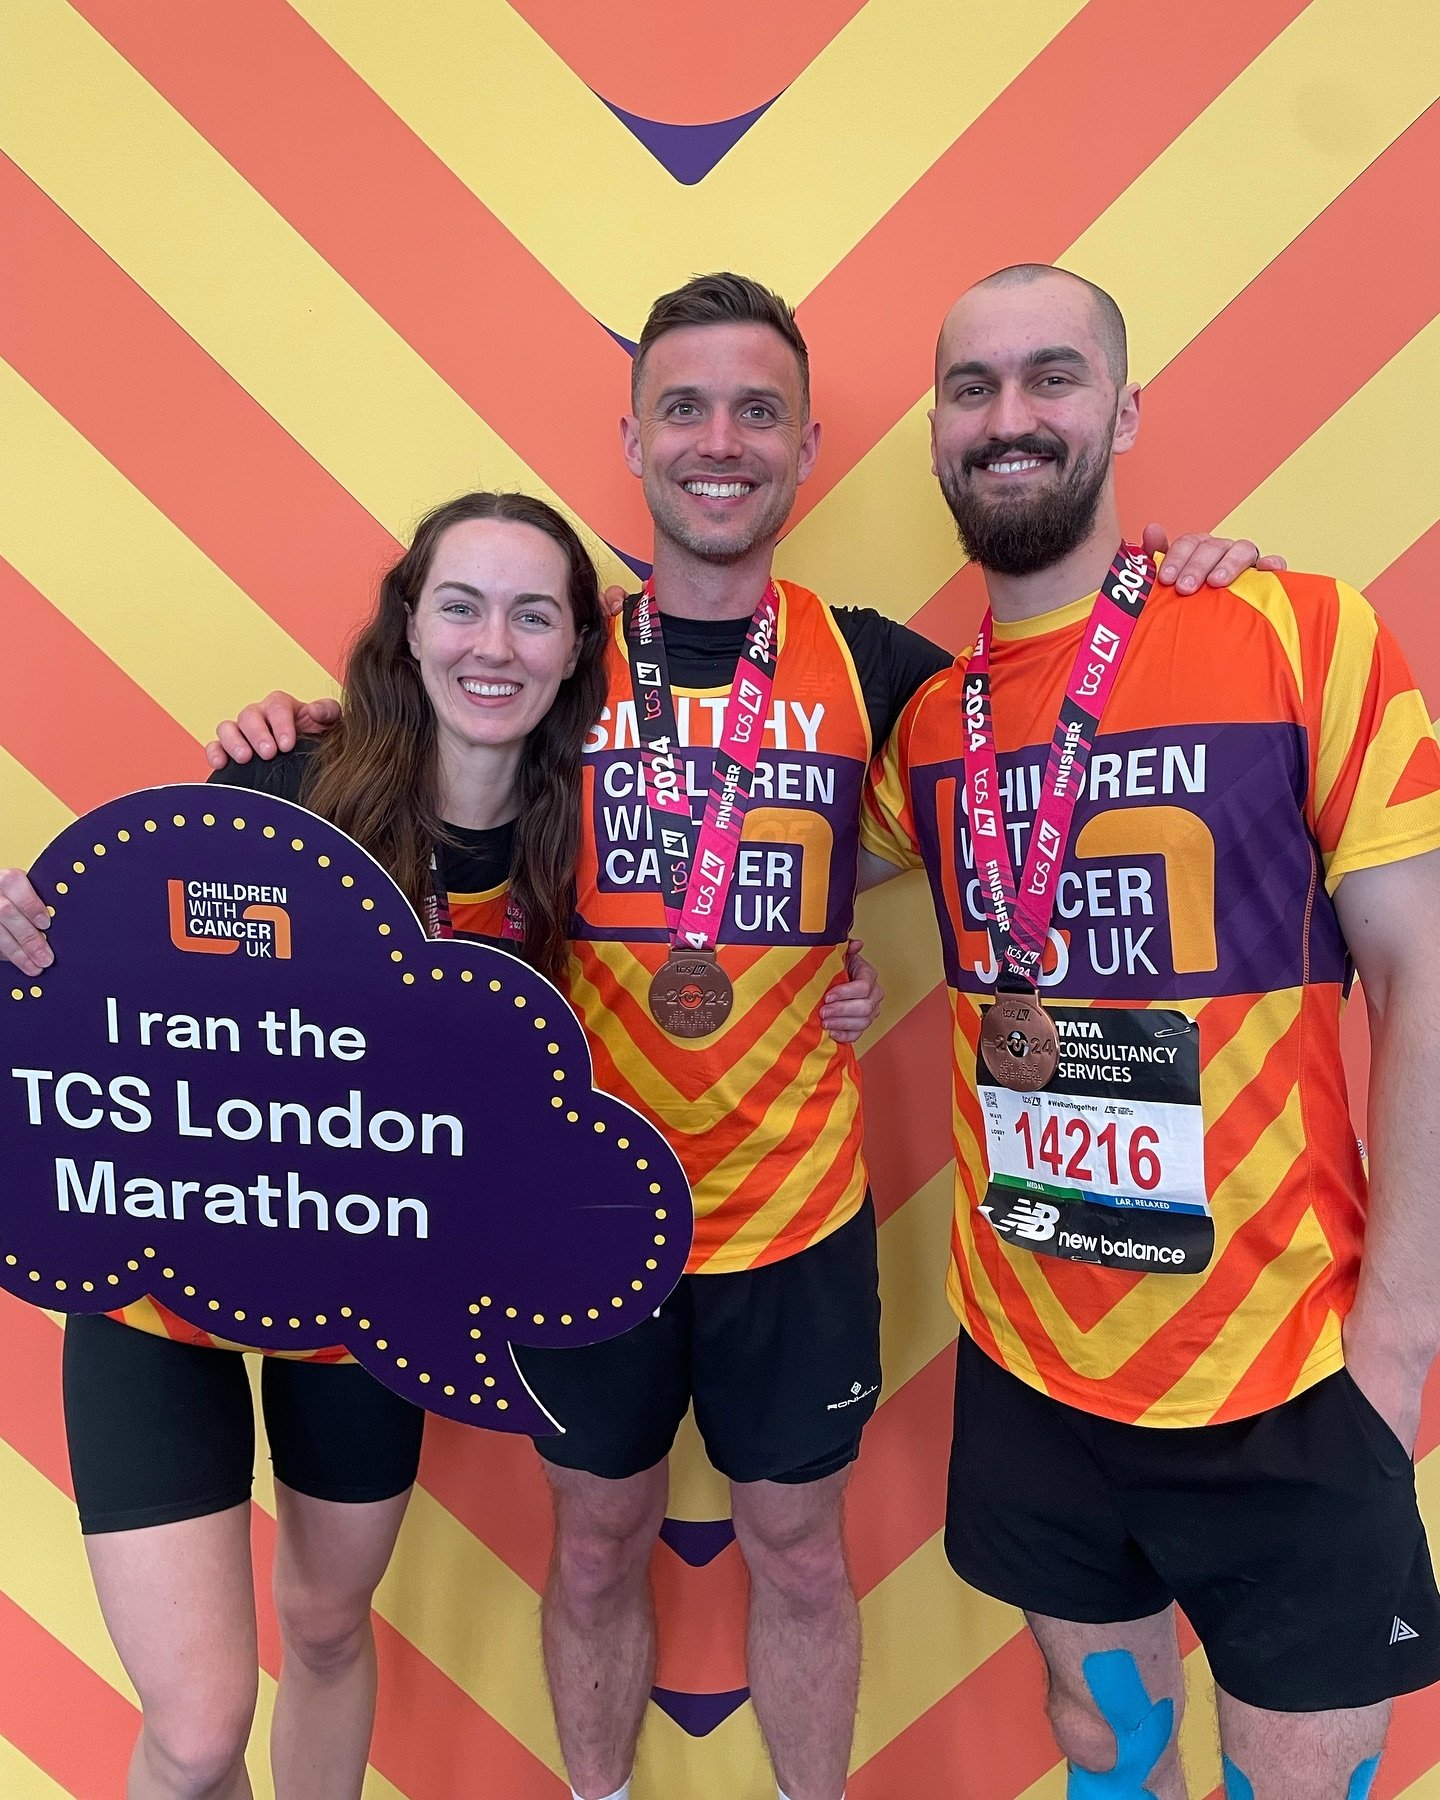 We are so proud of Sam, Jed &amp; Georgia for running the London Marathon yesterday and raising so much money for @childrenwithcanceruk 💜